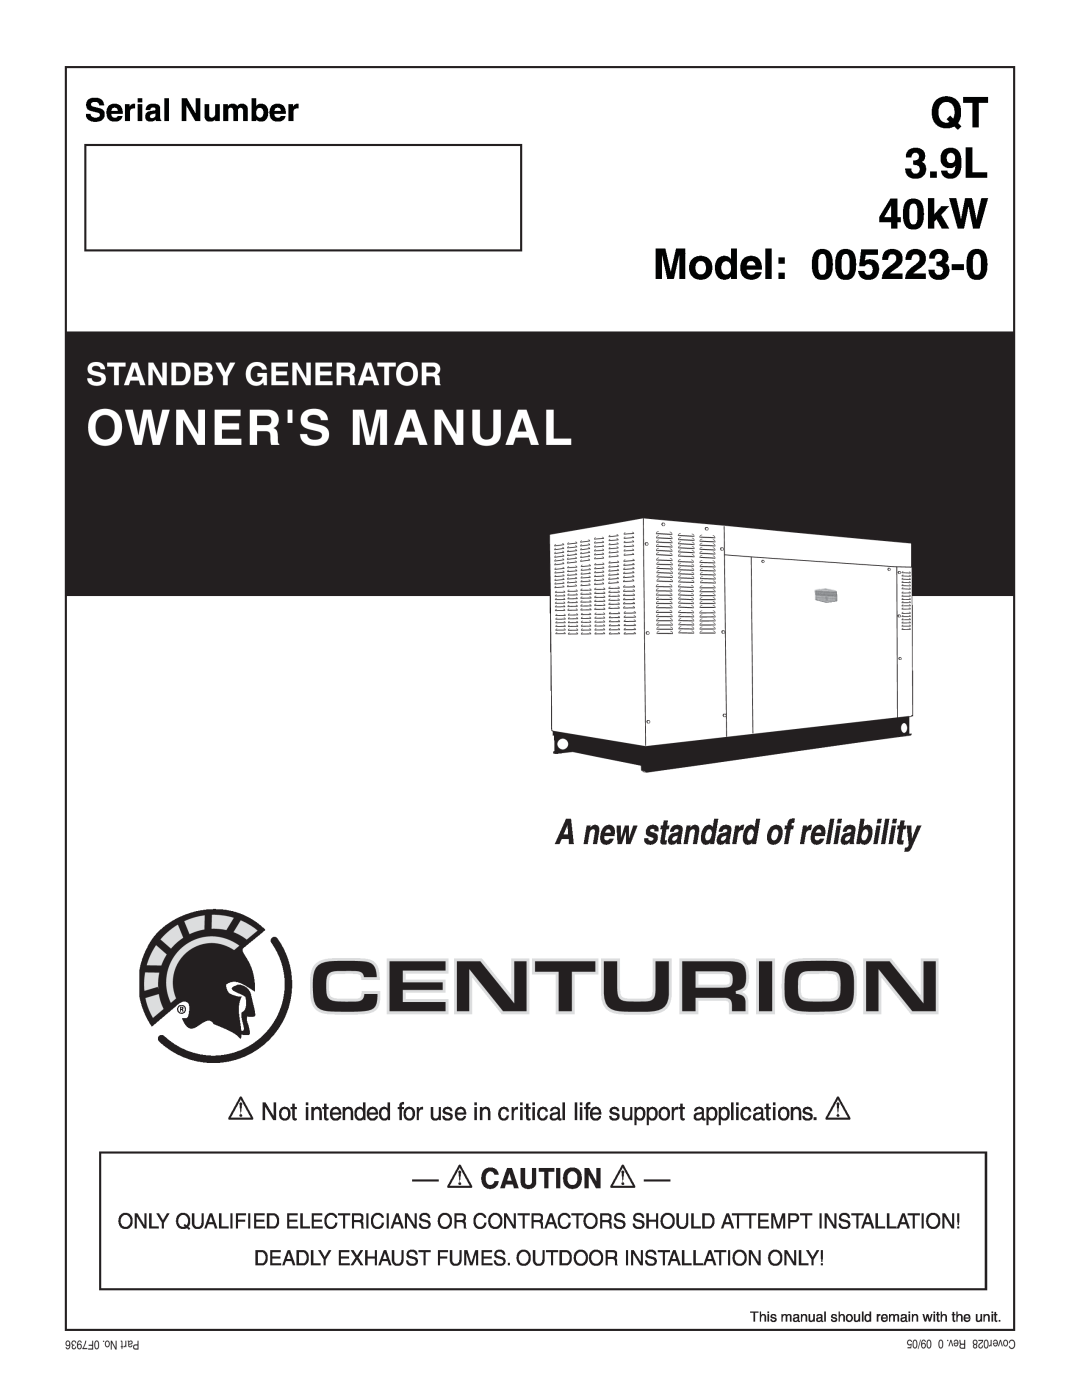 Generac Power Systems 005223-0 owner manual Centurion, Model, QT 3.9L 40kW, A new standard of reliability, Serial Number 